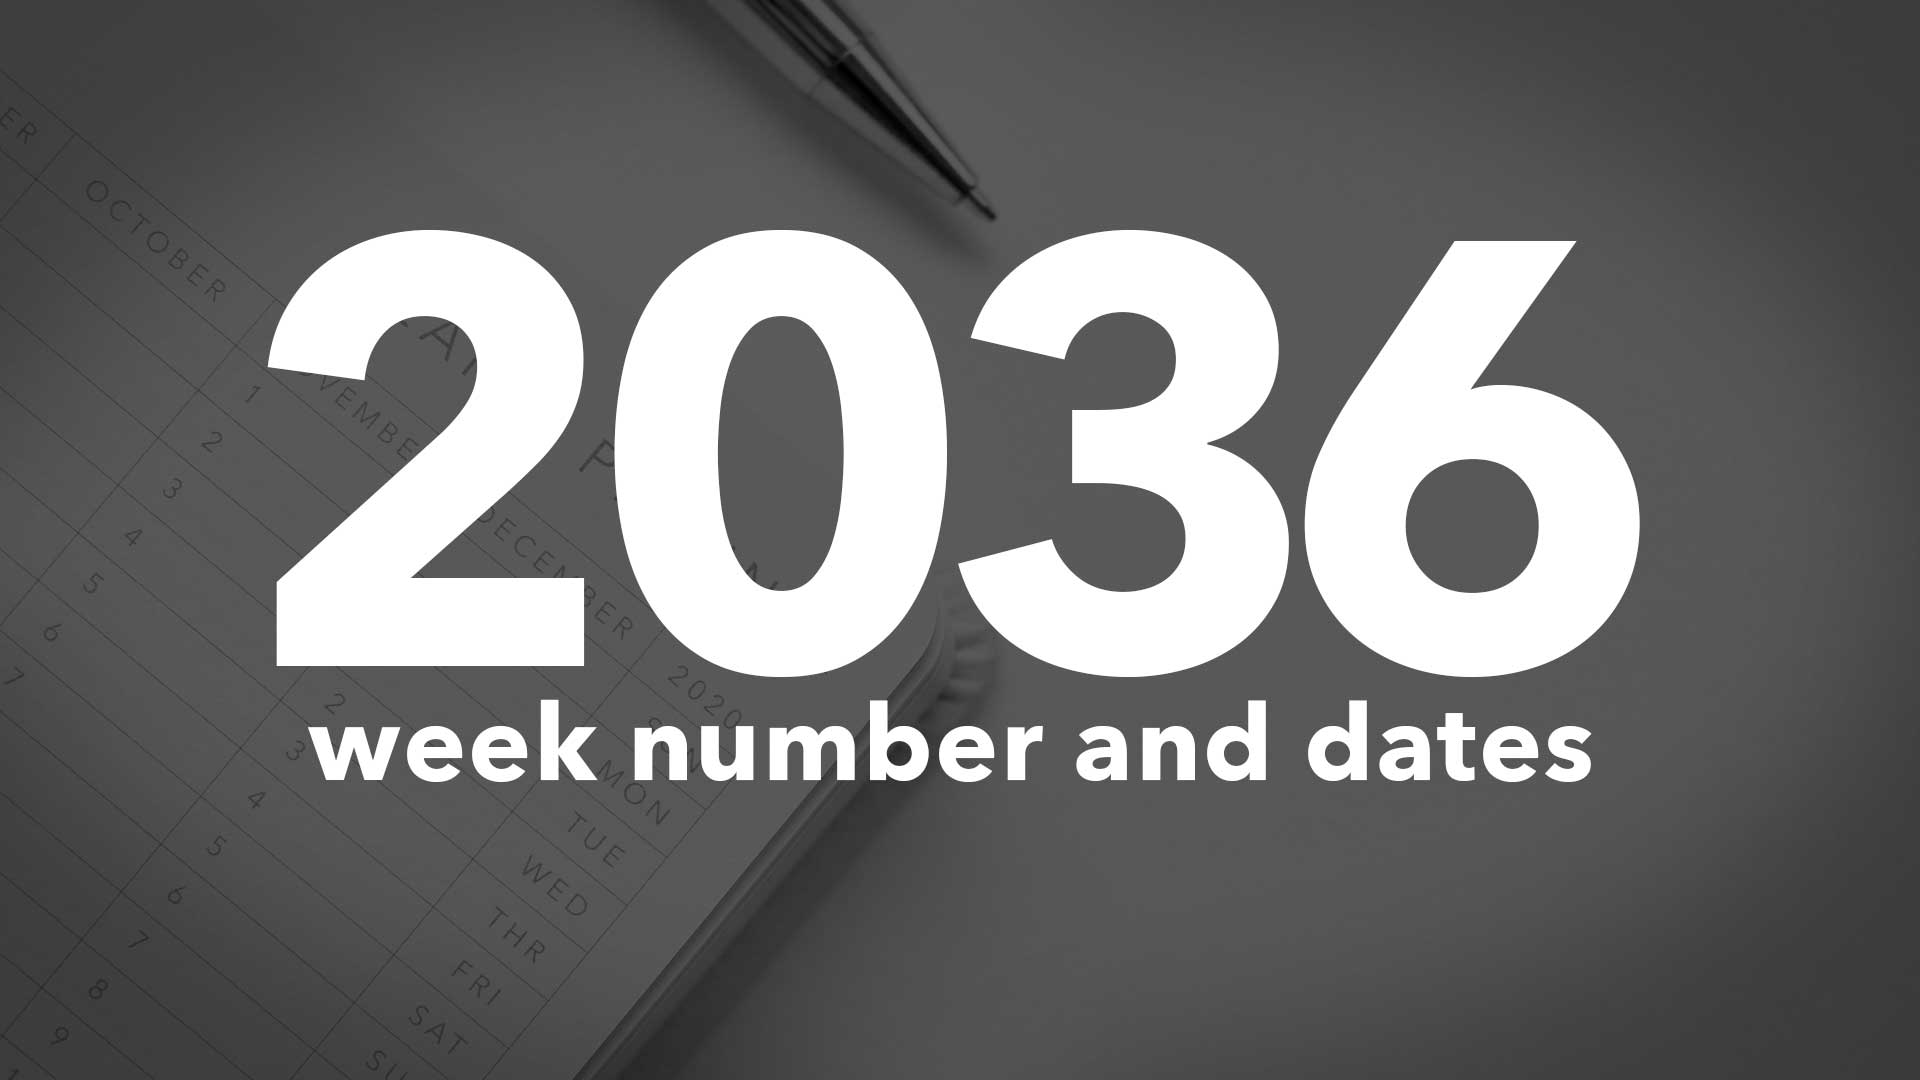 2036-calendar-week-numbers-and-dates-list-of-national-days